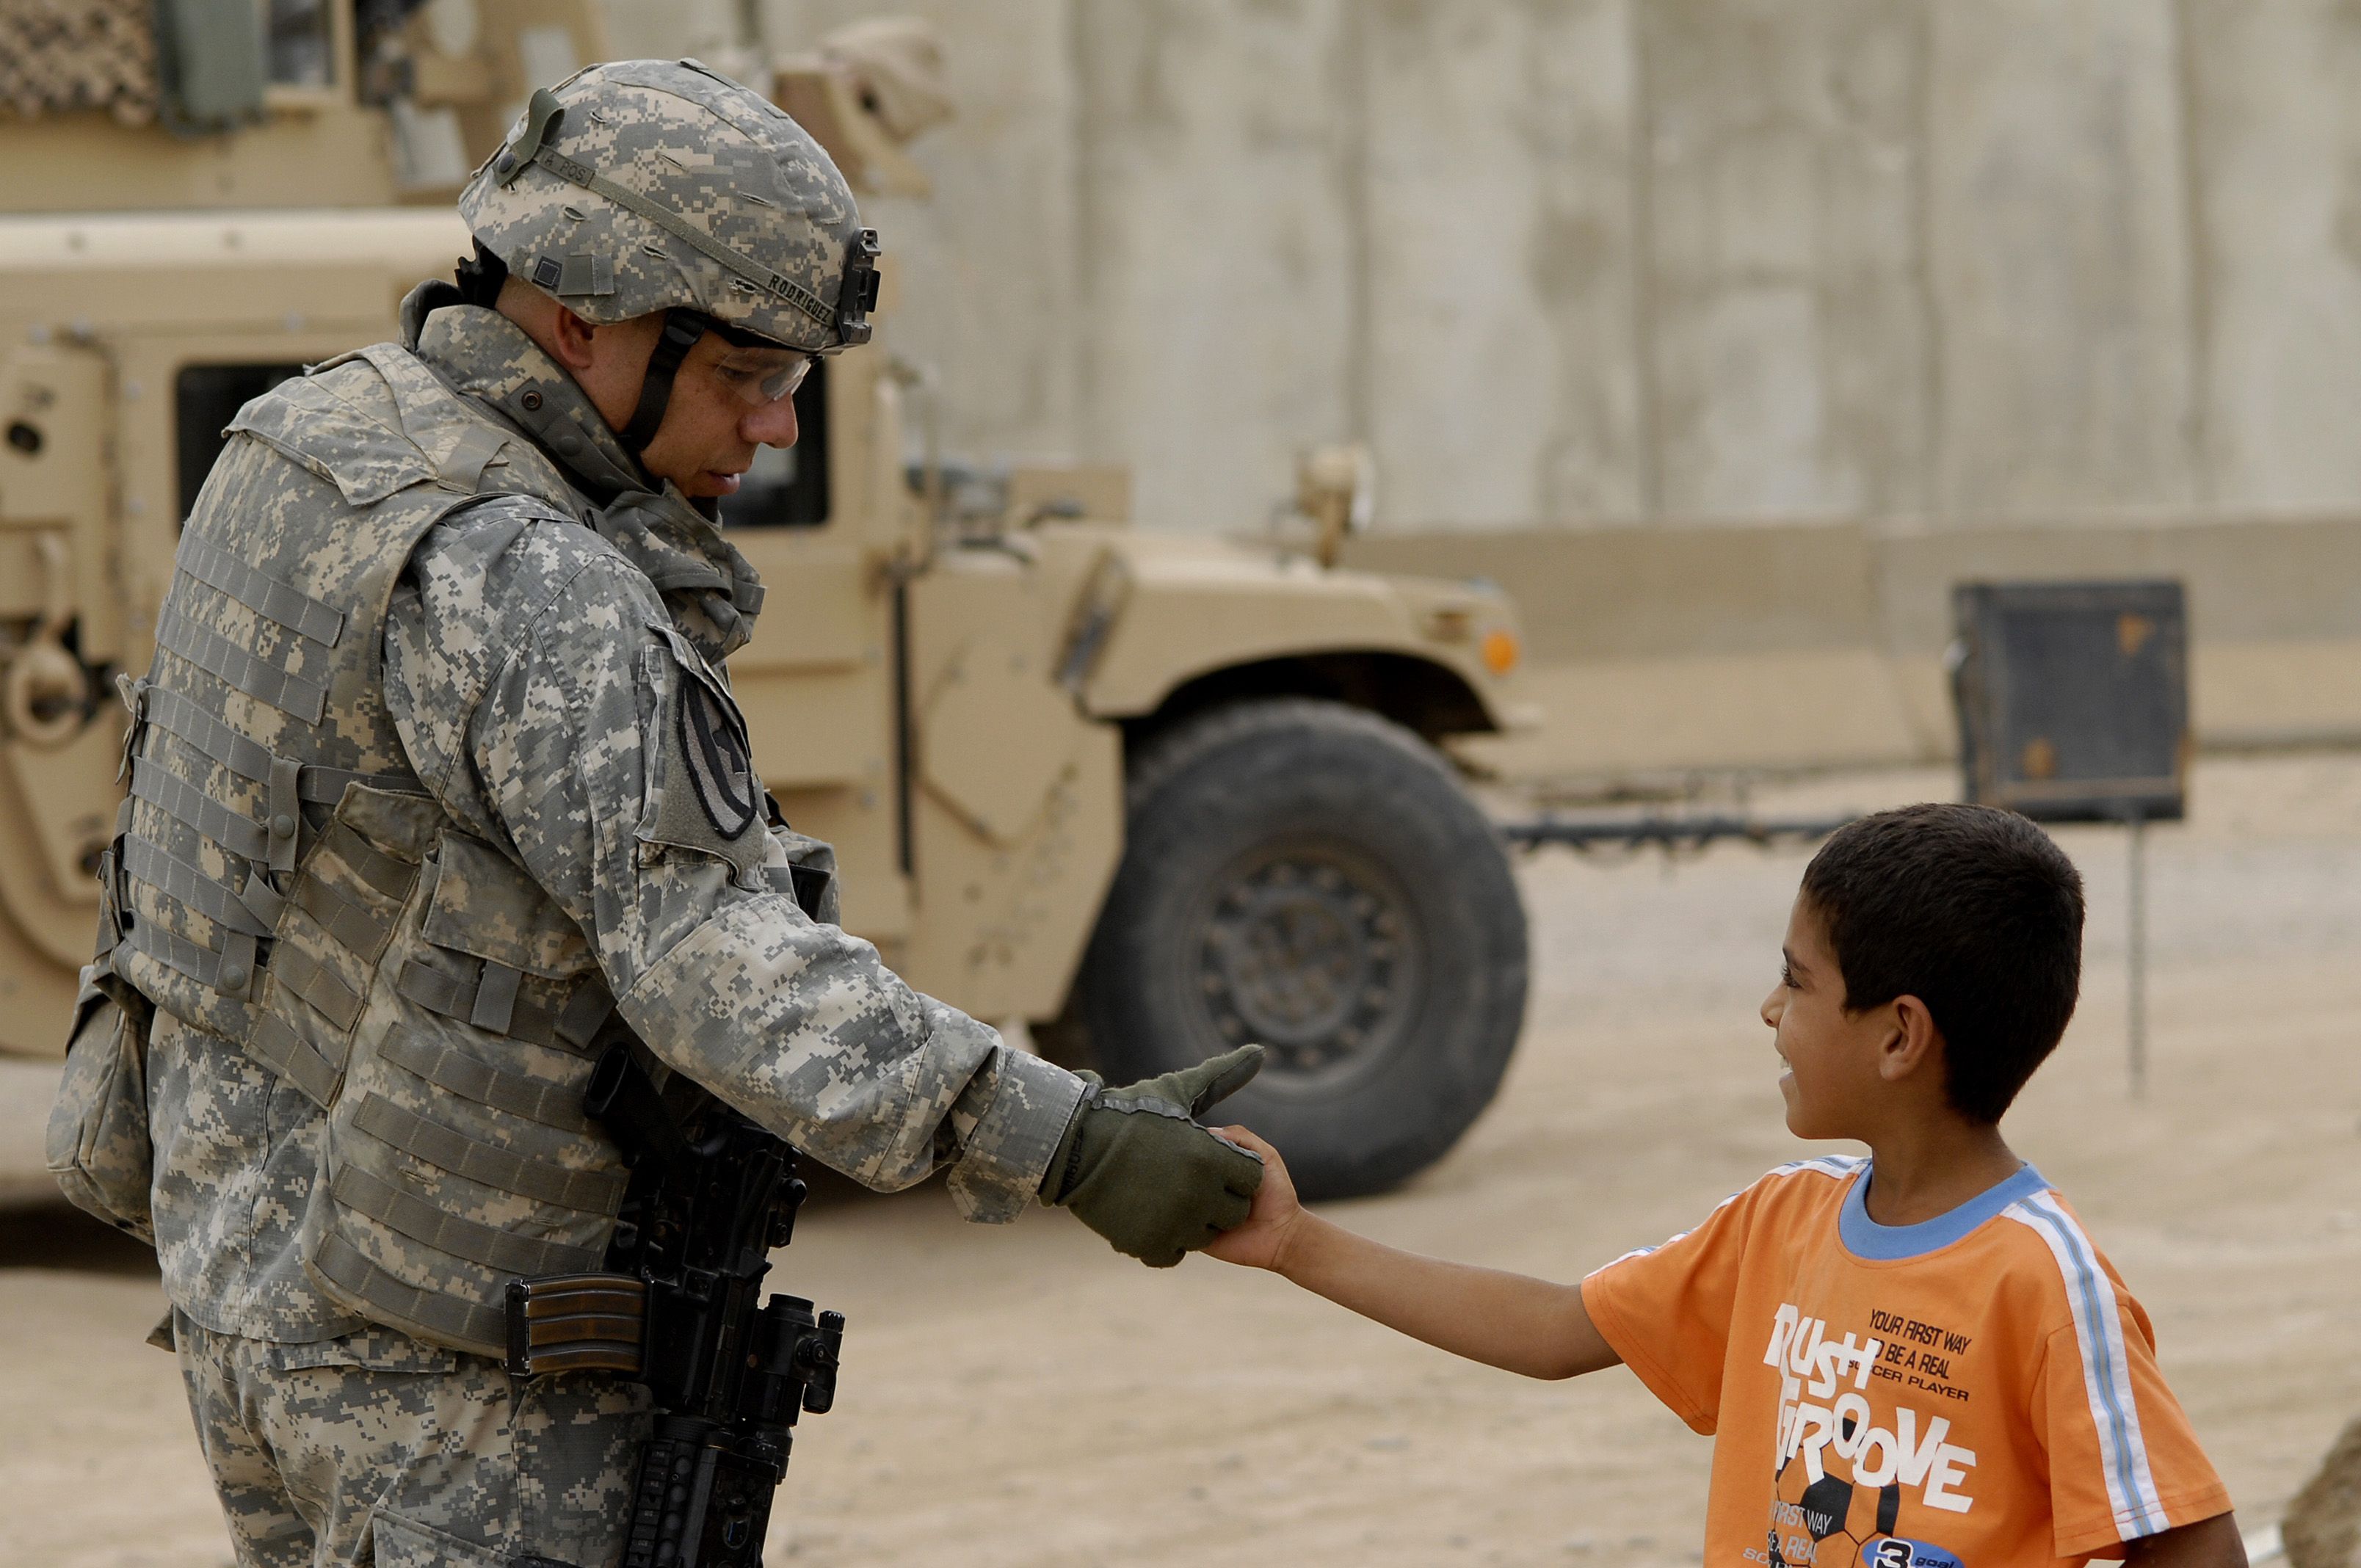 U.S. Army Maj. Robert Rodriguez shakes hands with a local child.